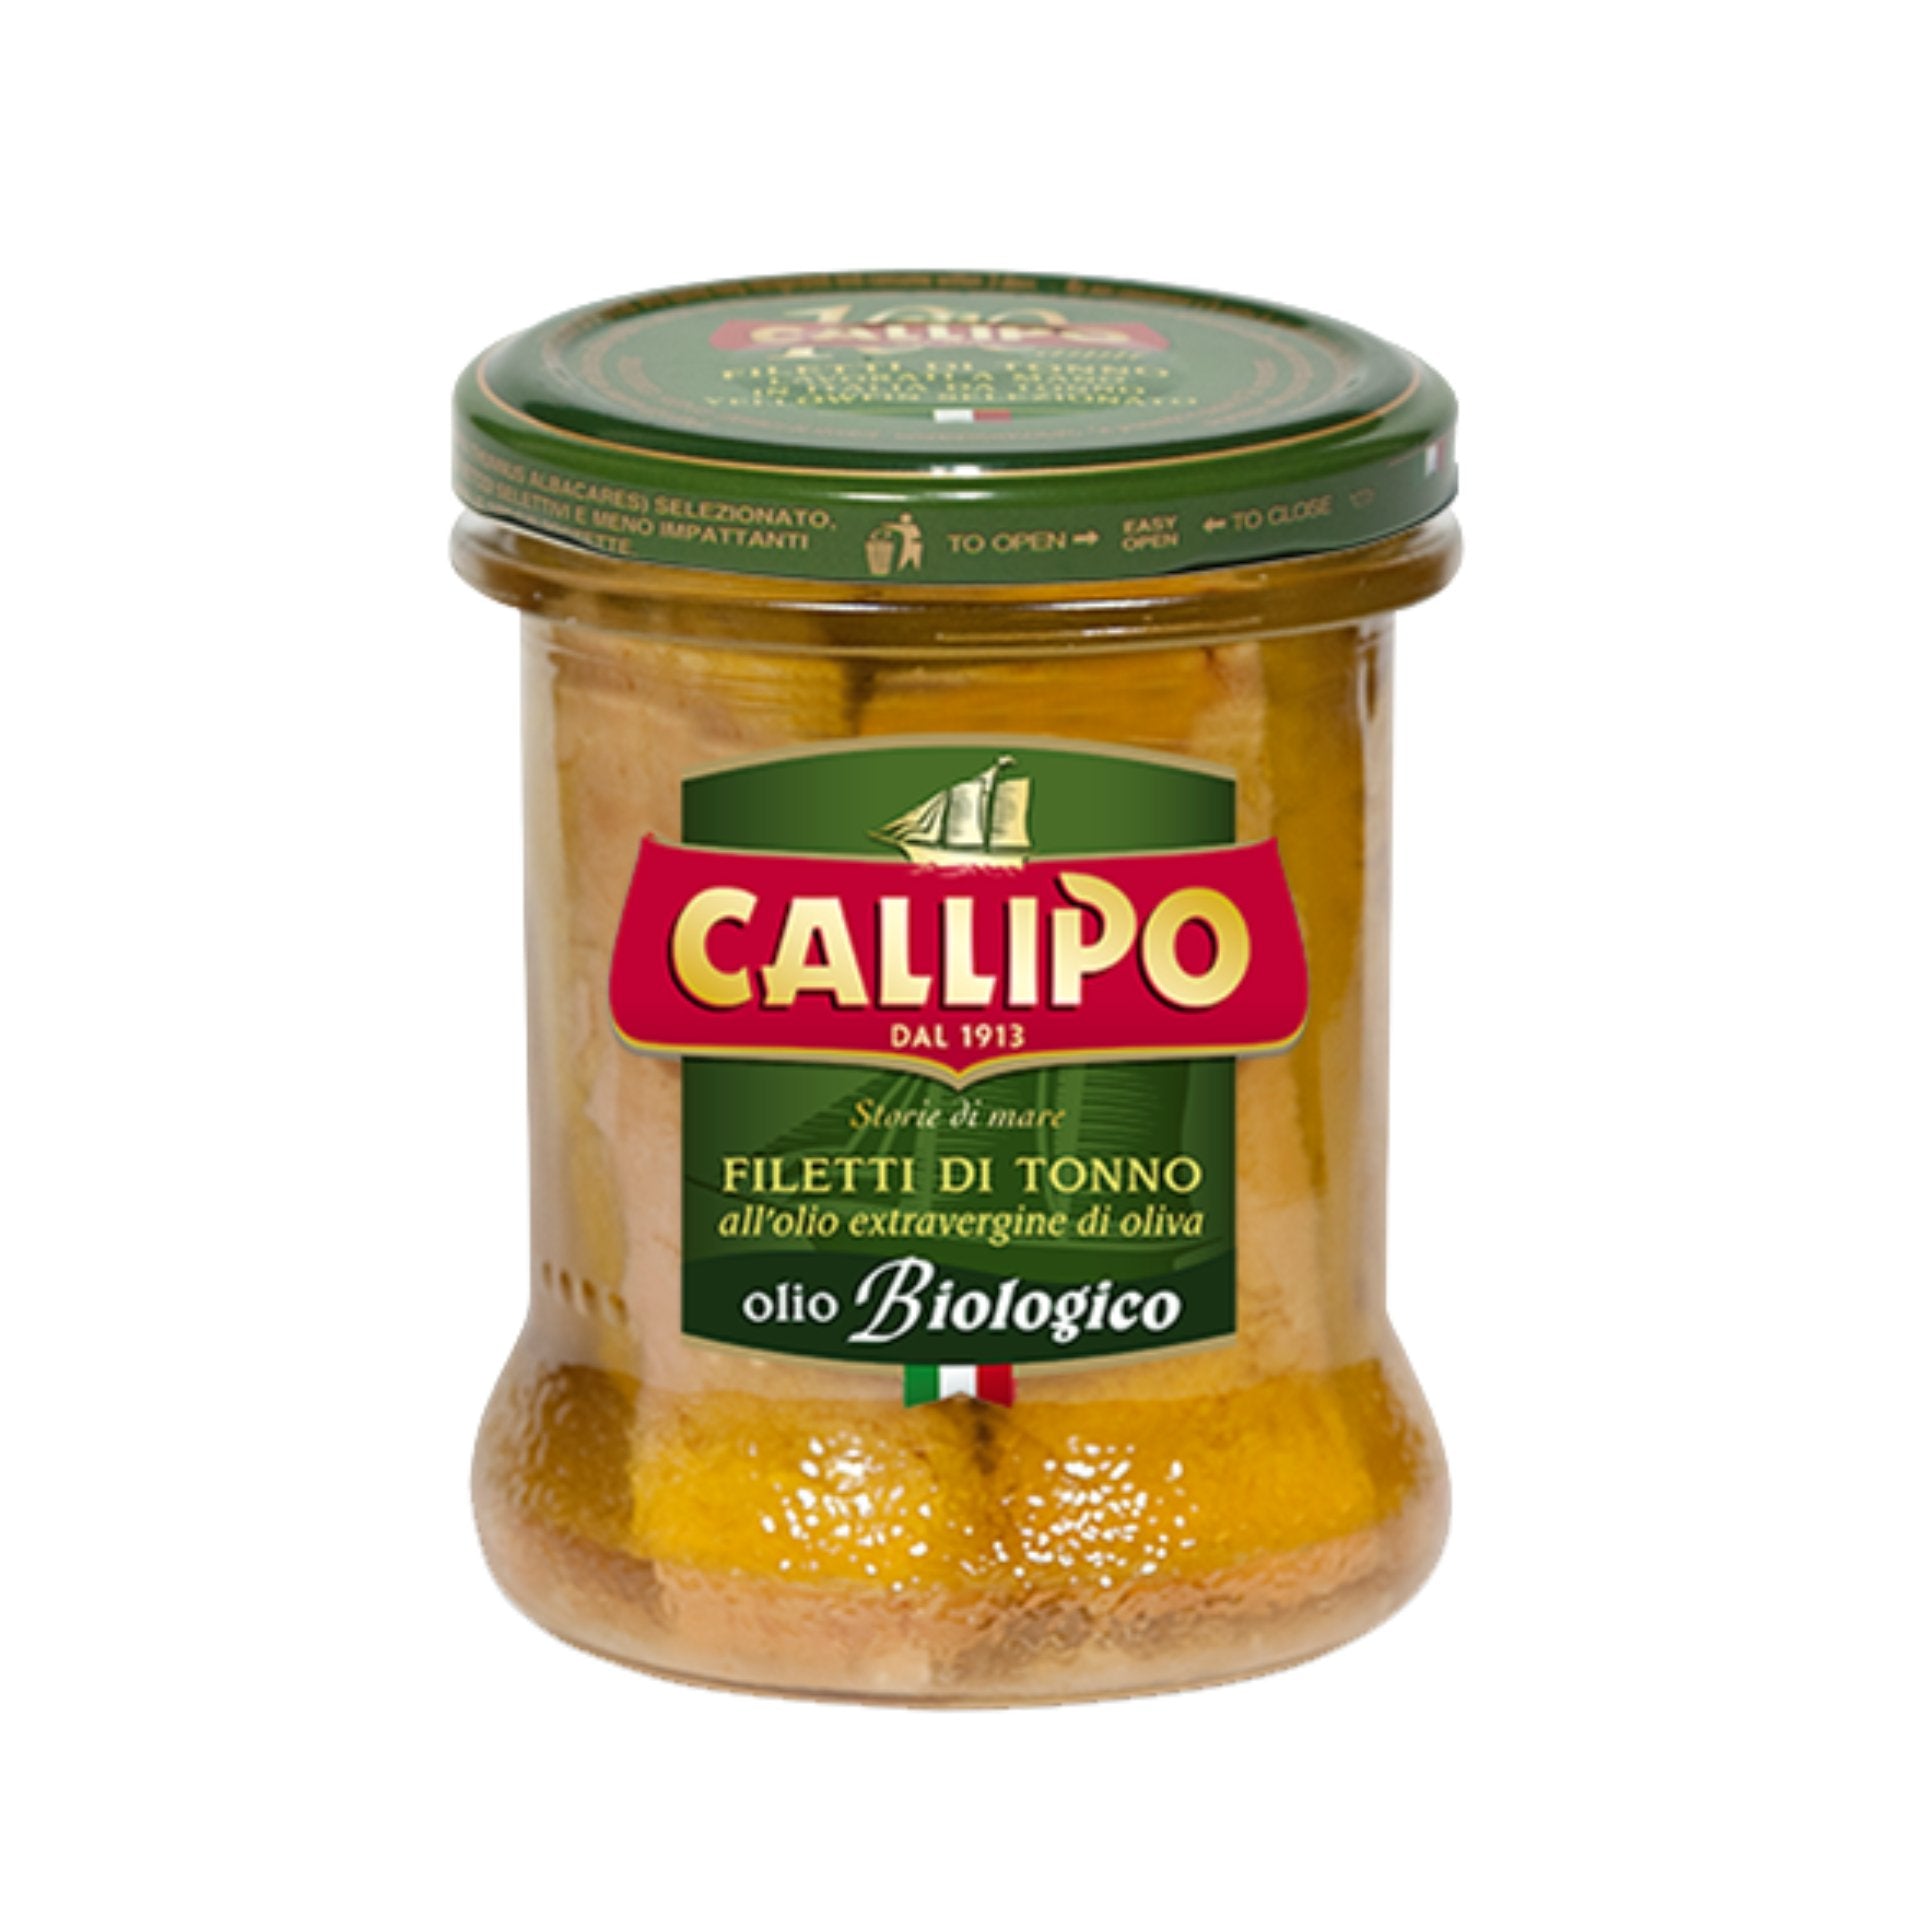 Callipo Hand Packed Yellowfin Tuna Fillets in Organic Extra Virgin Olive Oil 170g Feast Italy